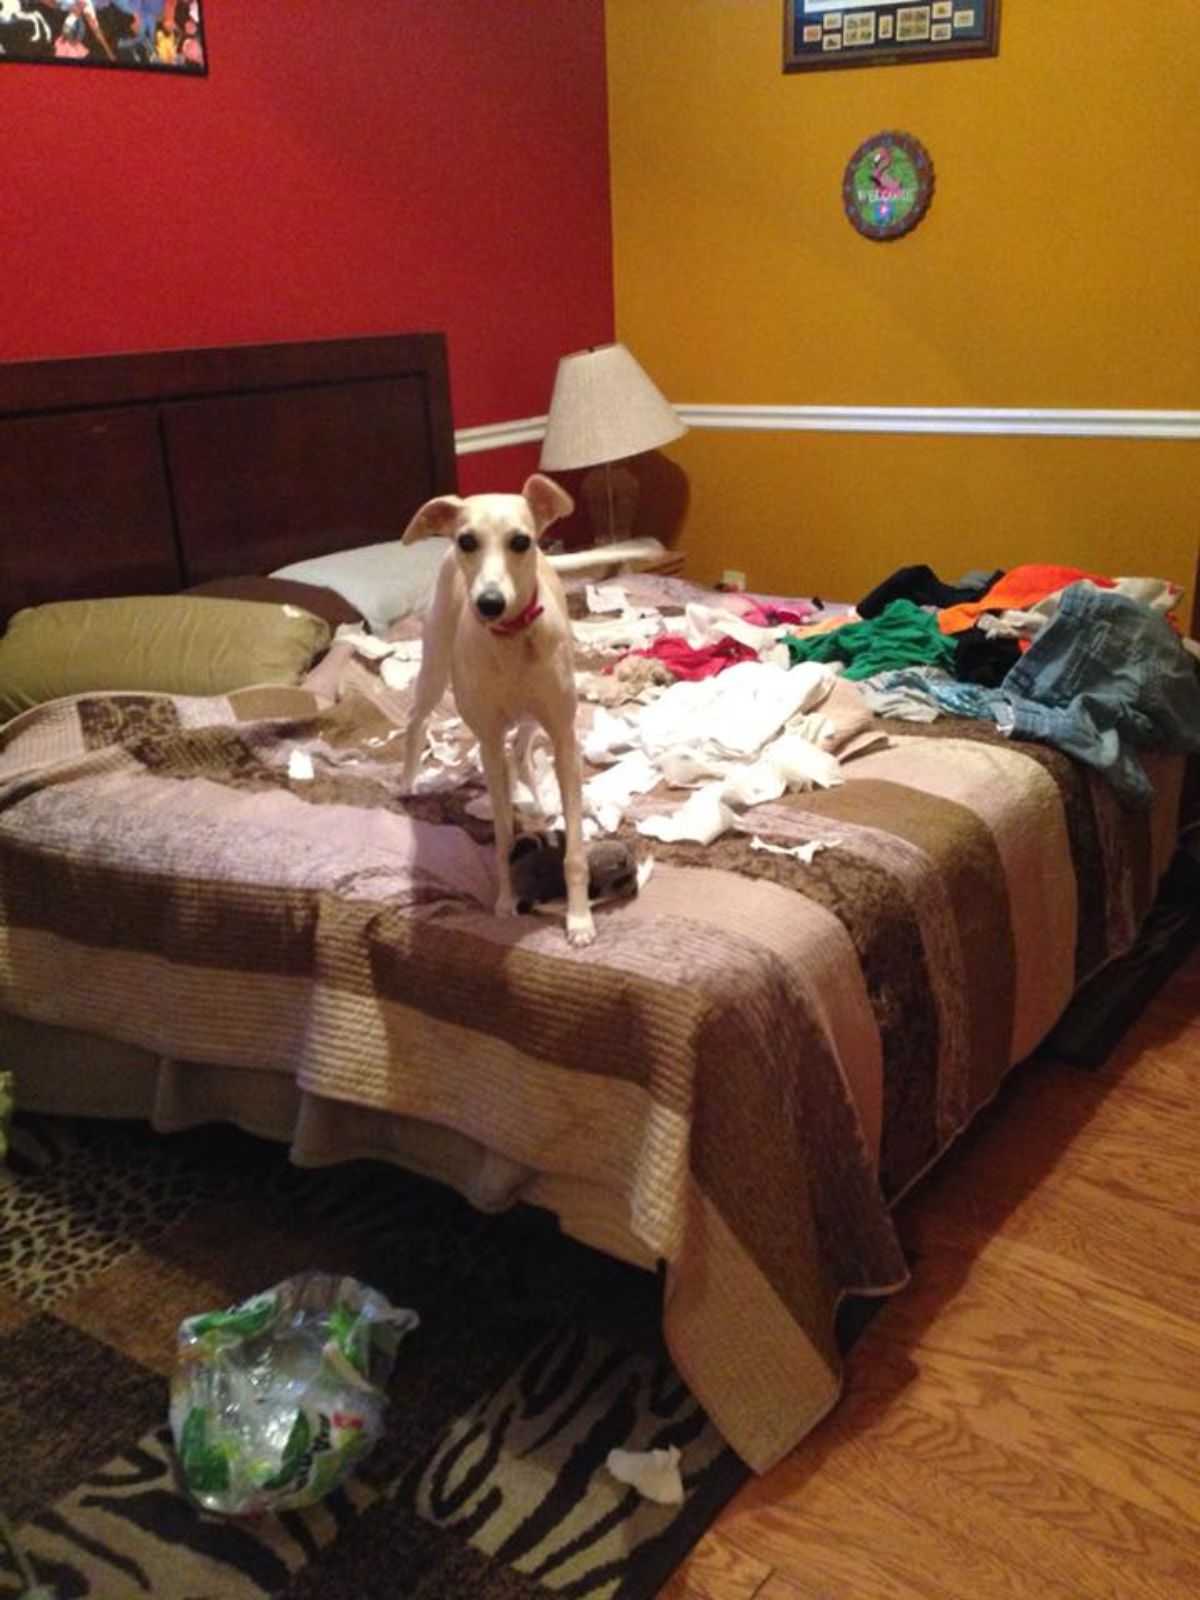 brown and white dog standing on a bed with ripped up toilet paper on it